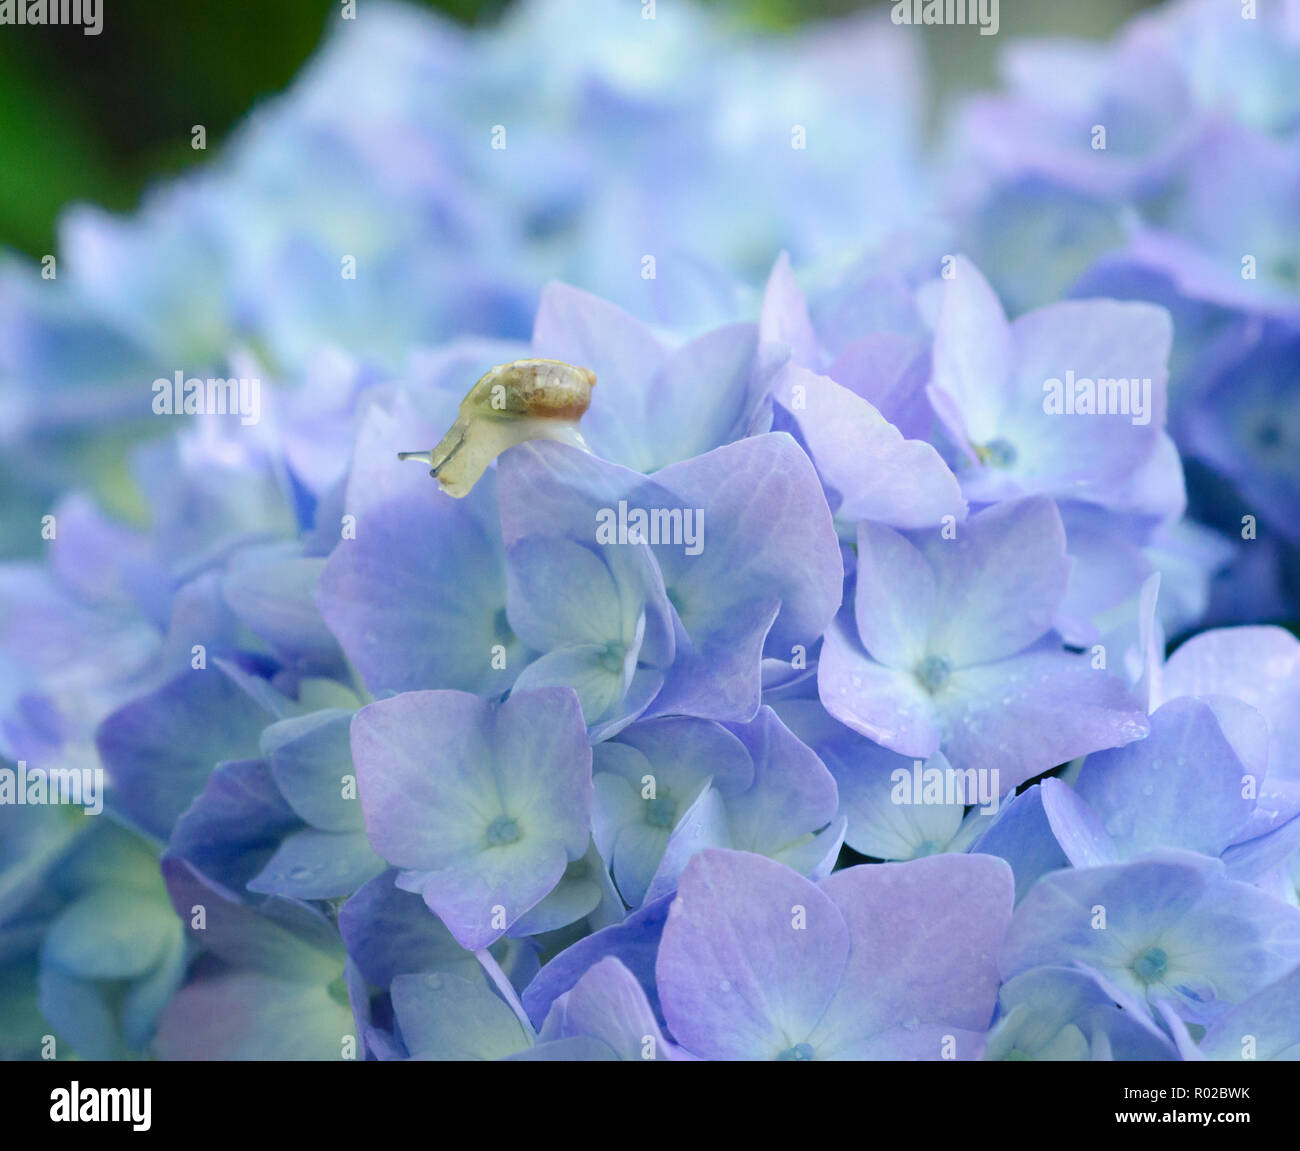 Closeup of a snail on hydrangea flowers with raindrops. Stock Photo